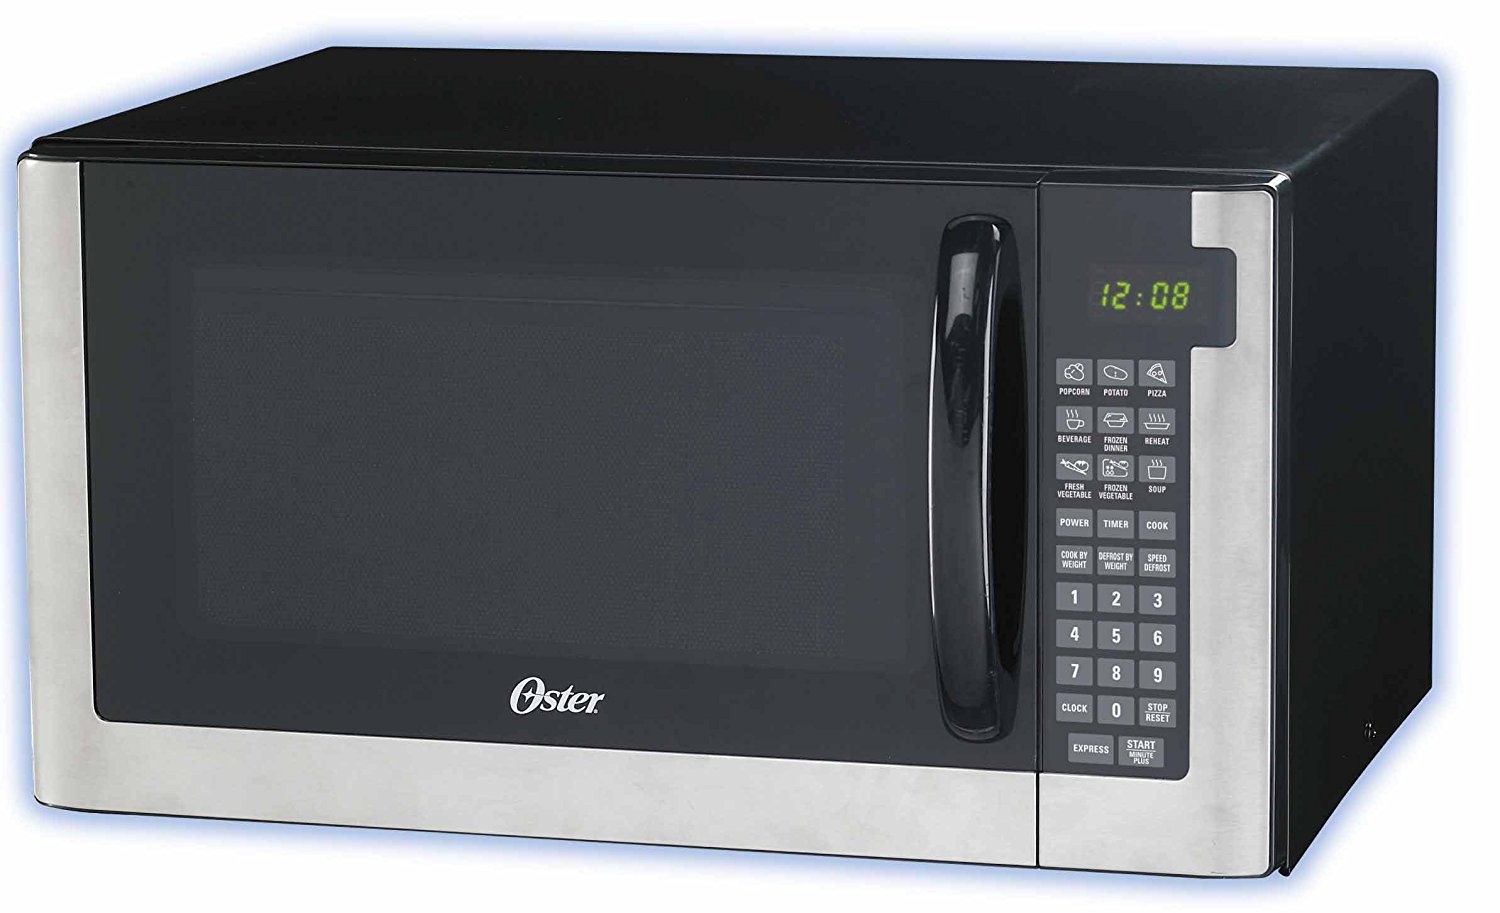 Oster OGG61403-B 1.4-Cubic Foot Digital Microwave Oven, Stainless Steel